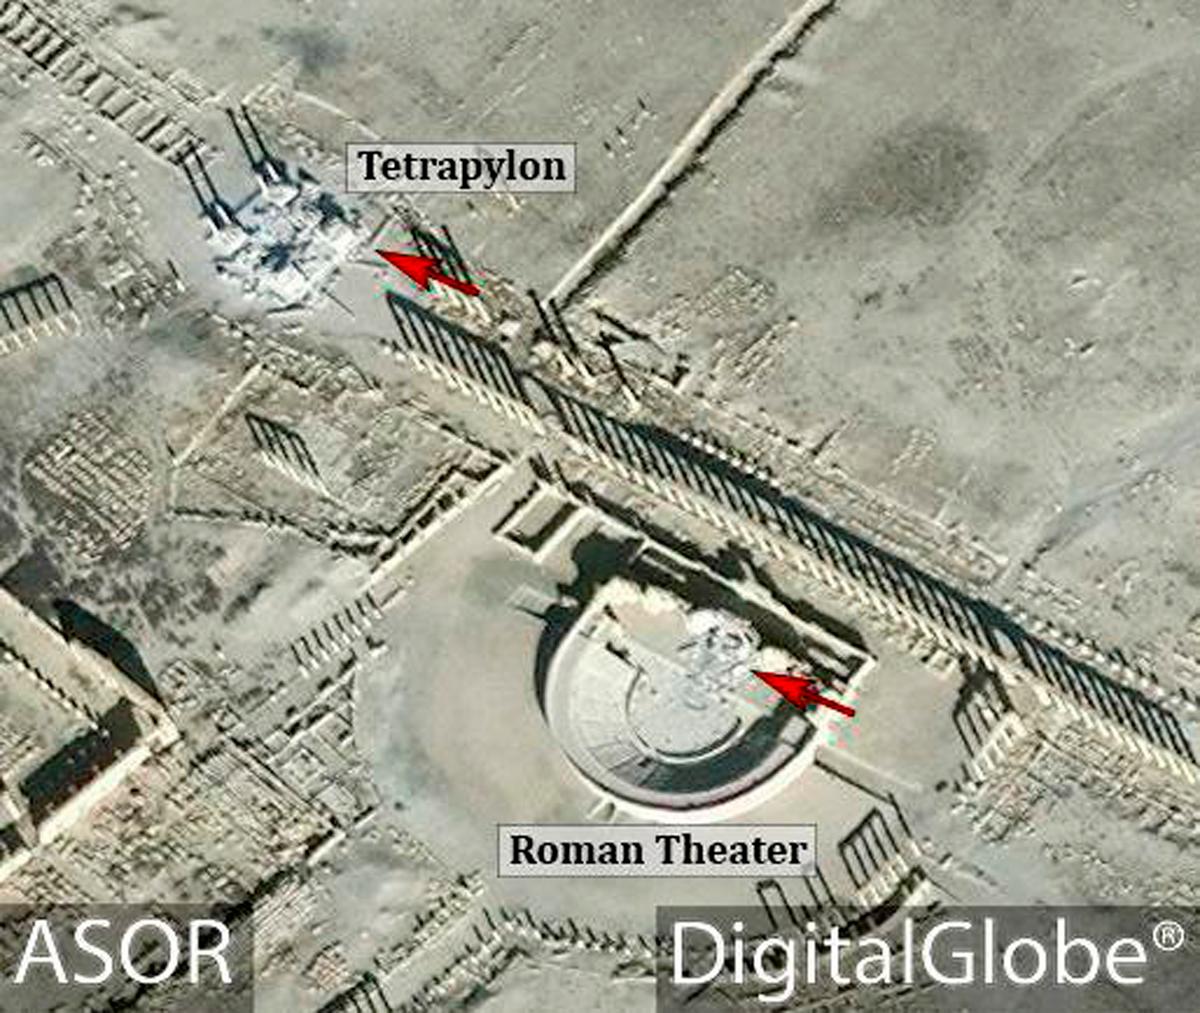 This satellite image released by the American Schools of Oriental Research (ASOR) on Friday, Jan. 20, 2017 as captured by DigitalGlobe shows the Roman theater at the UNESCO World Heritage Site of Palmyra, Syria with red denoting area of new damages on Jan. 10, 2017. (ASOR/ DigitalGlobe via AP)